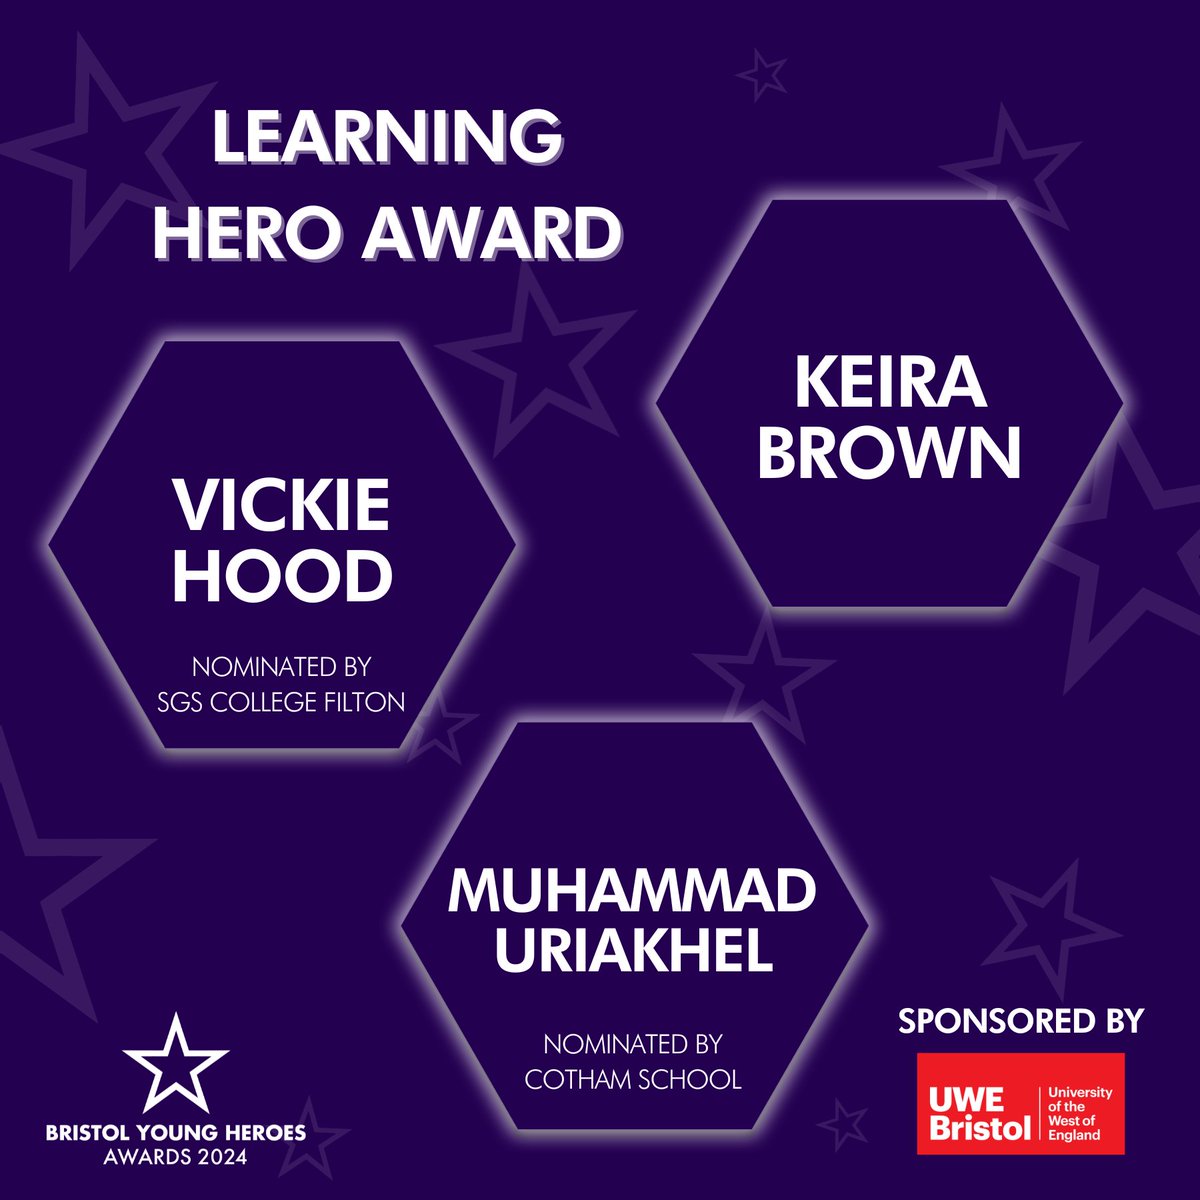 ✨Learning Hero Award✨ We are thrilled to announce the finalists for the Learning Hero Award are: 🌟 Vickie Hood 🌟 Keira Brown 🌟 Muhammad Uriakhel Congratulations and we wish you all the best of luck 🤞 Thank you to @UWEBristol for sponsoring the Learning Hero Award 🙏